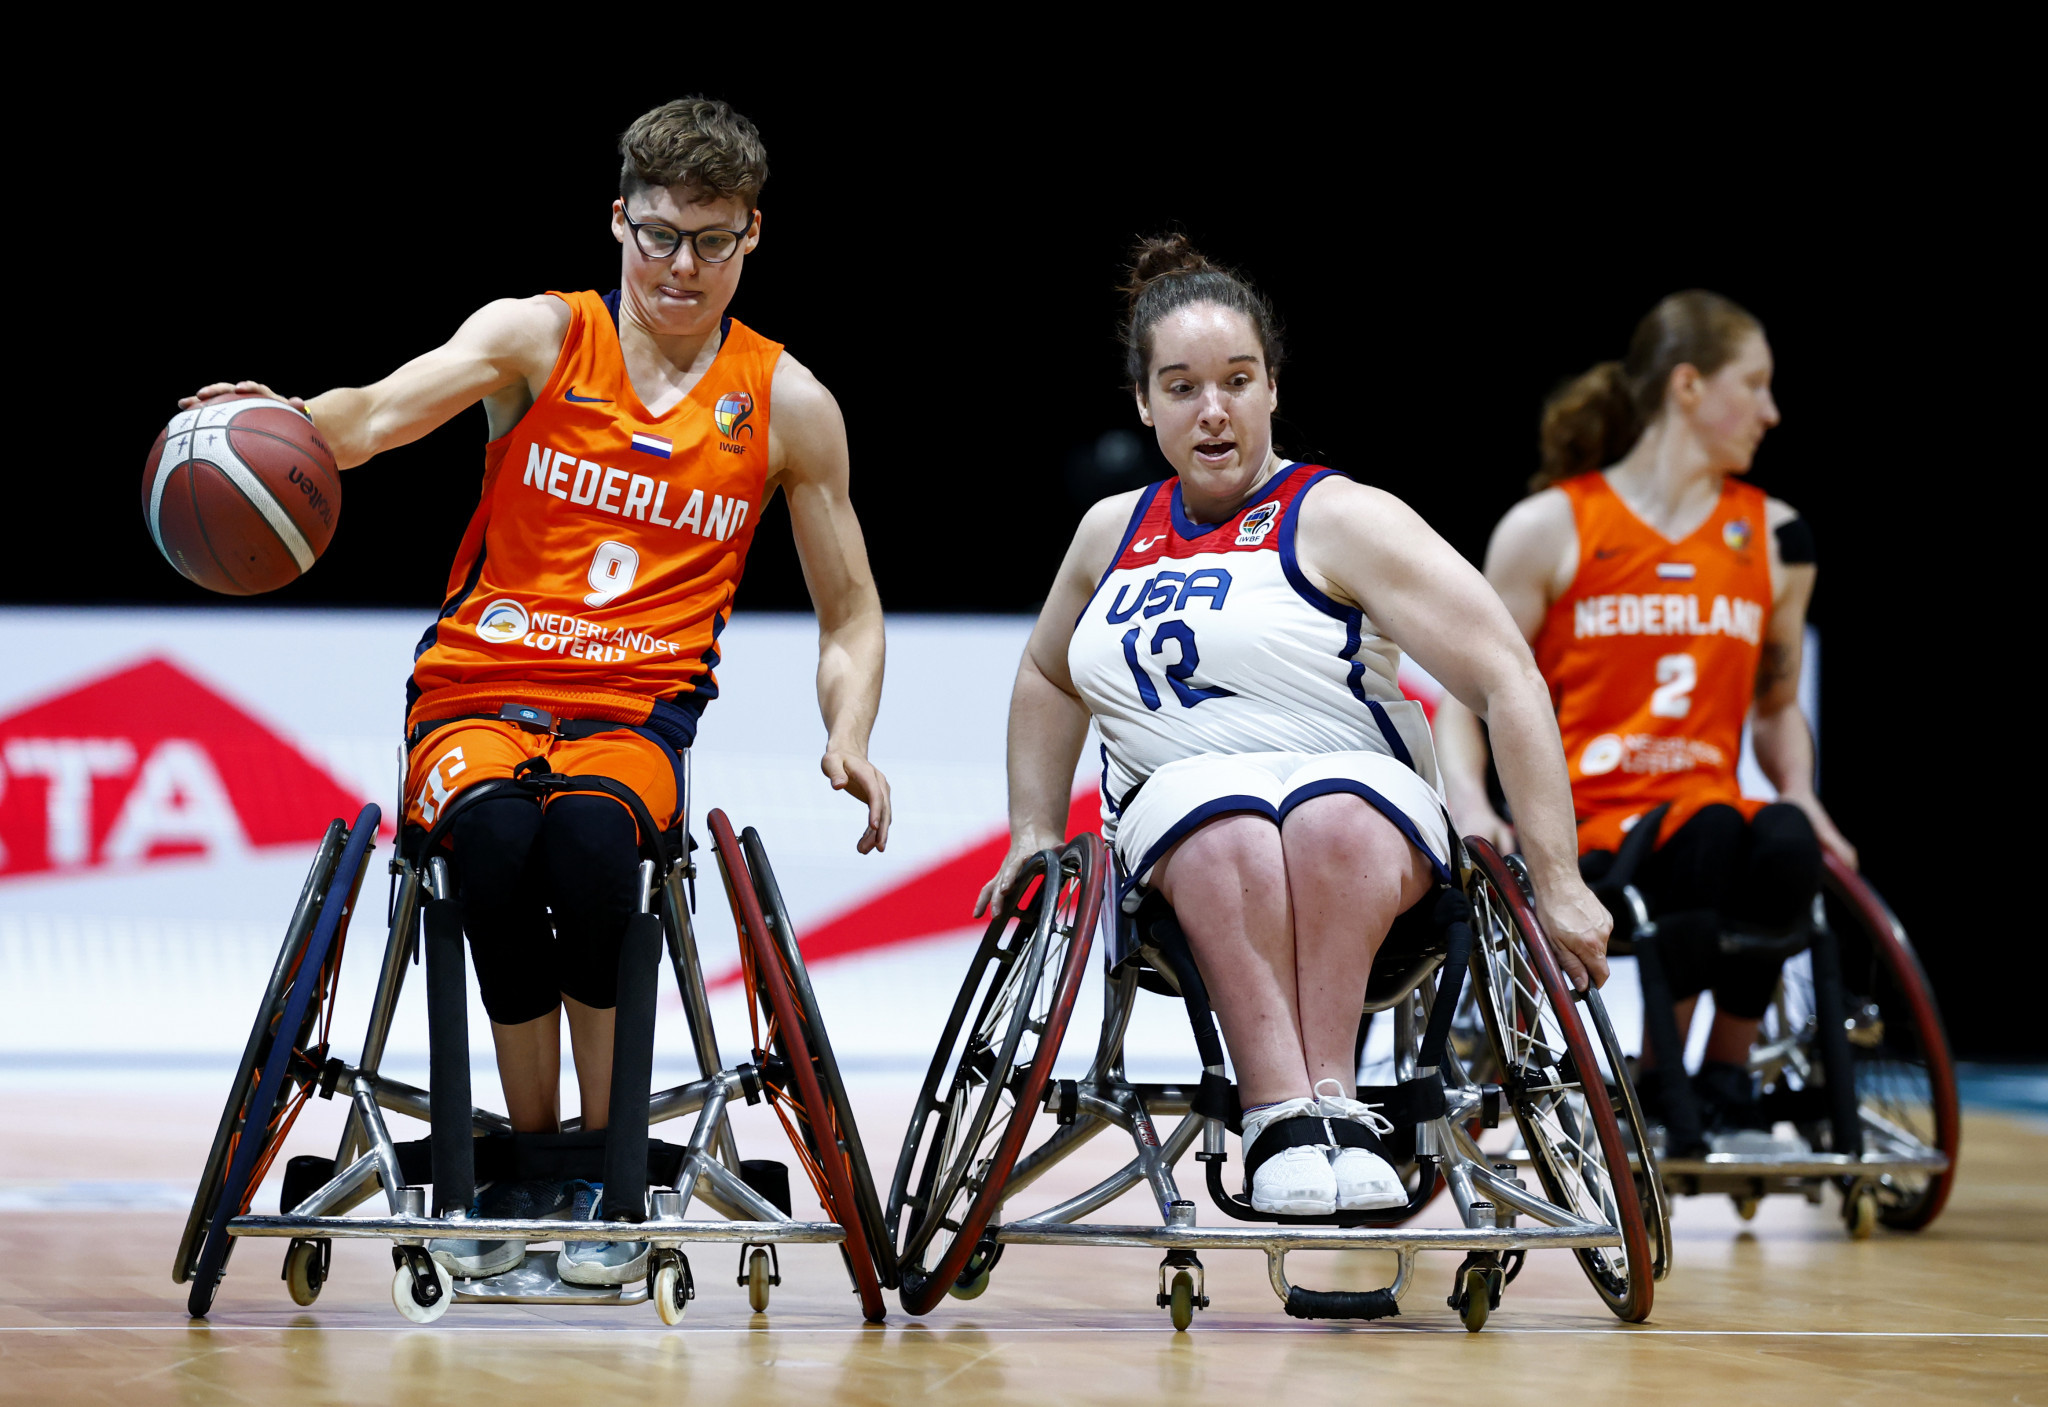 Netherlands and US share spoils in semi-final match-ups at IWBF World Championships